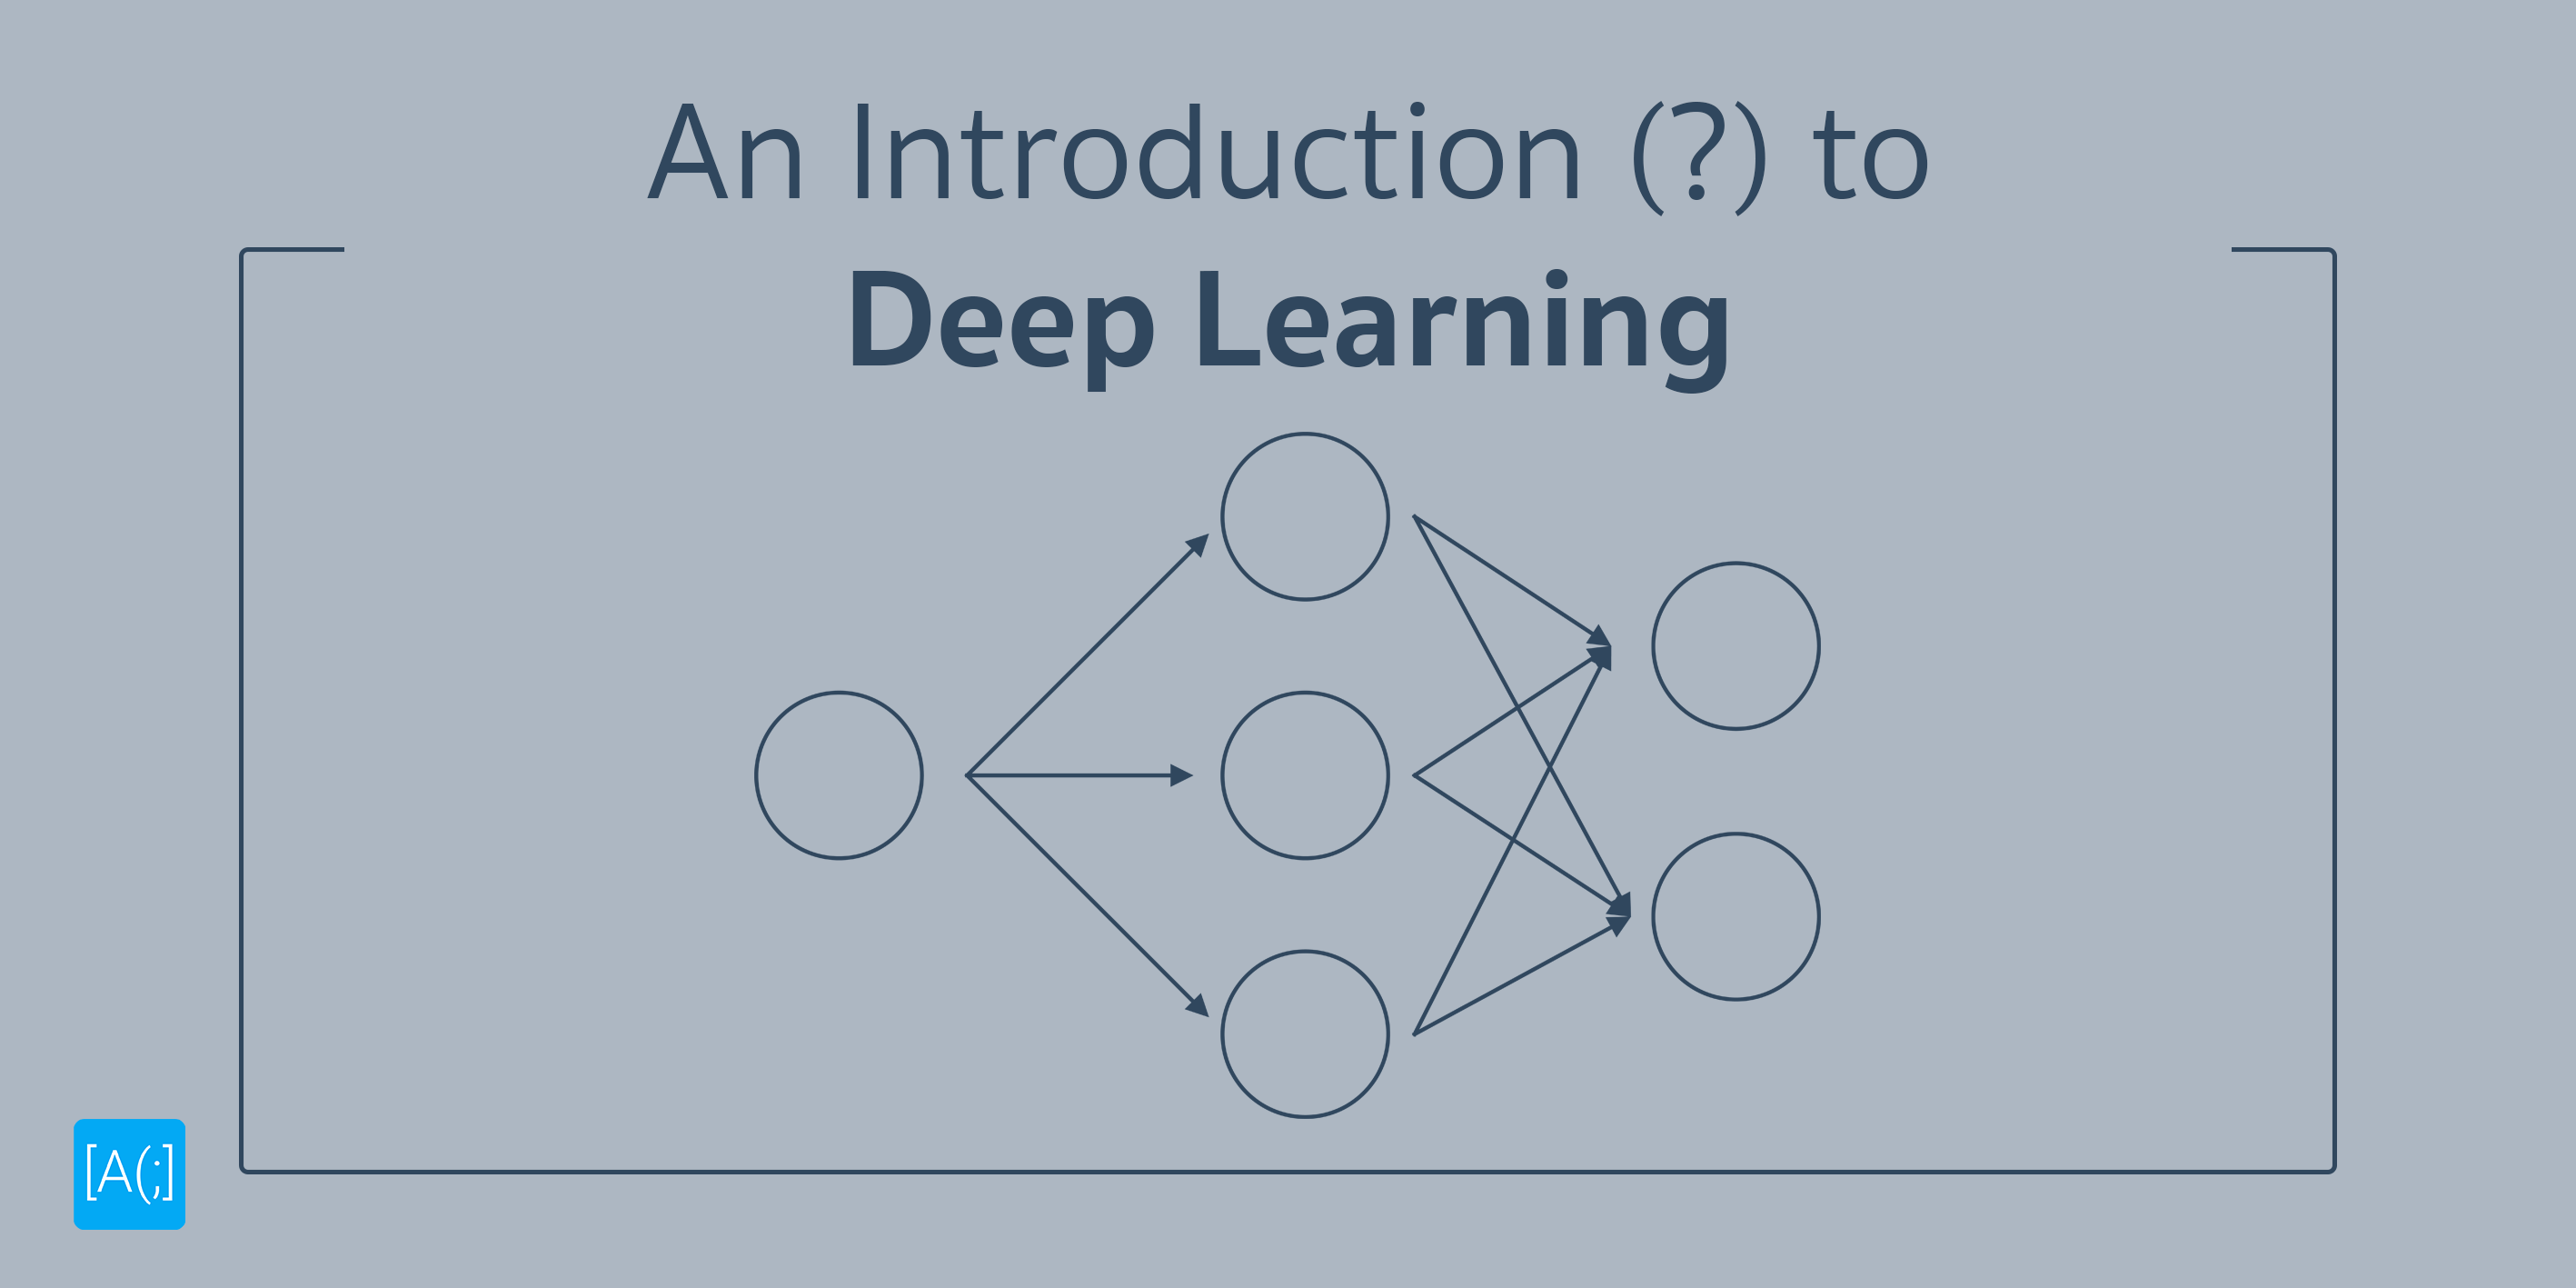 An Introduction (?) to Deep Learning